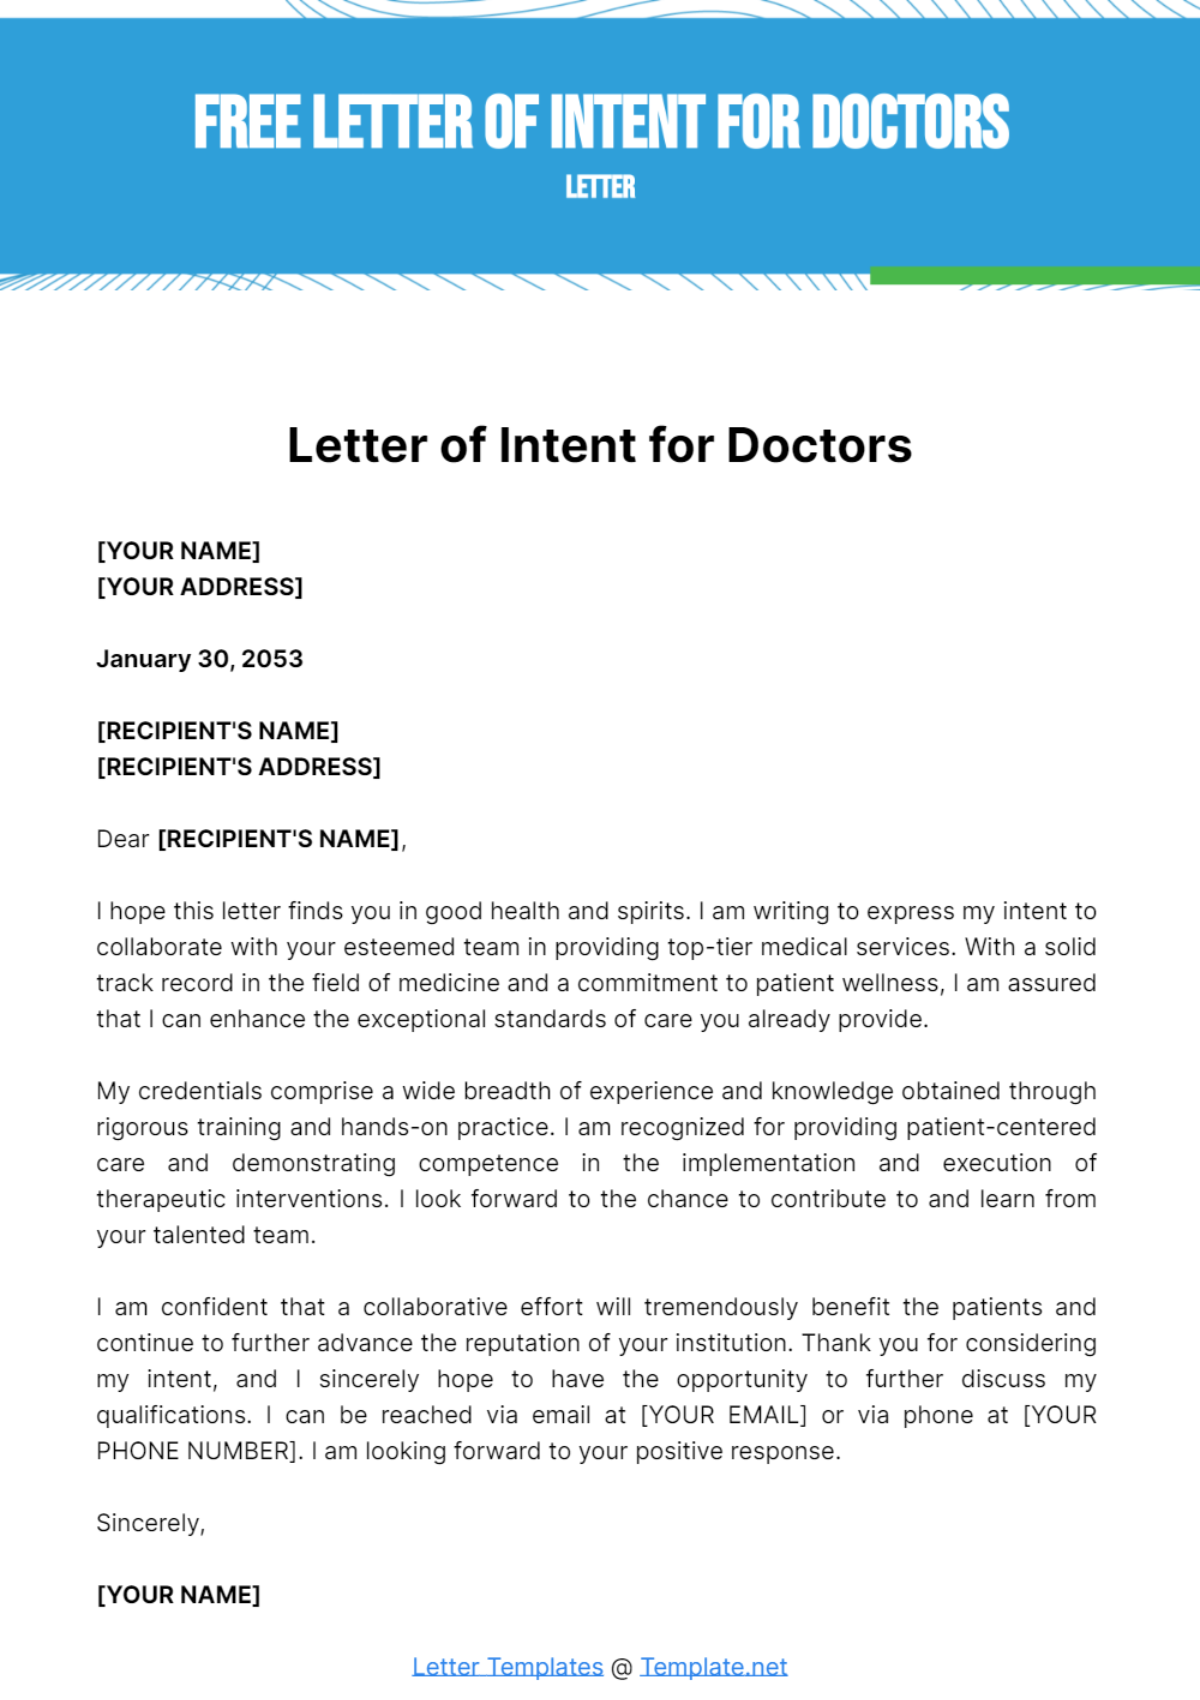 Free Letter of Intent for Doctors Template